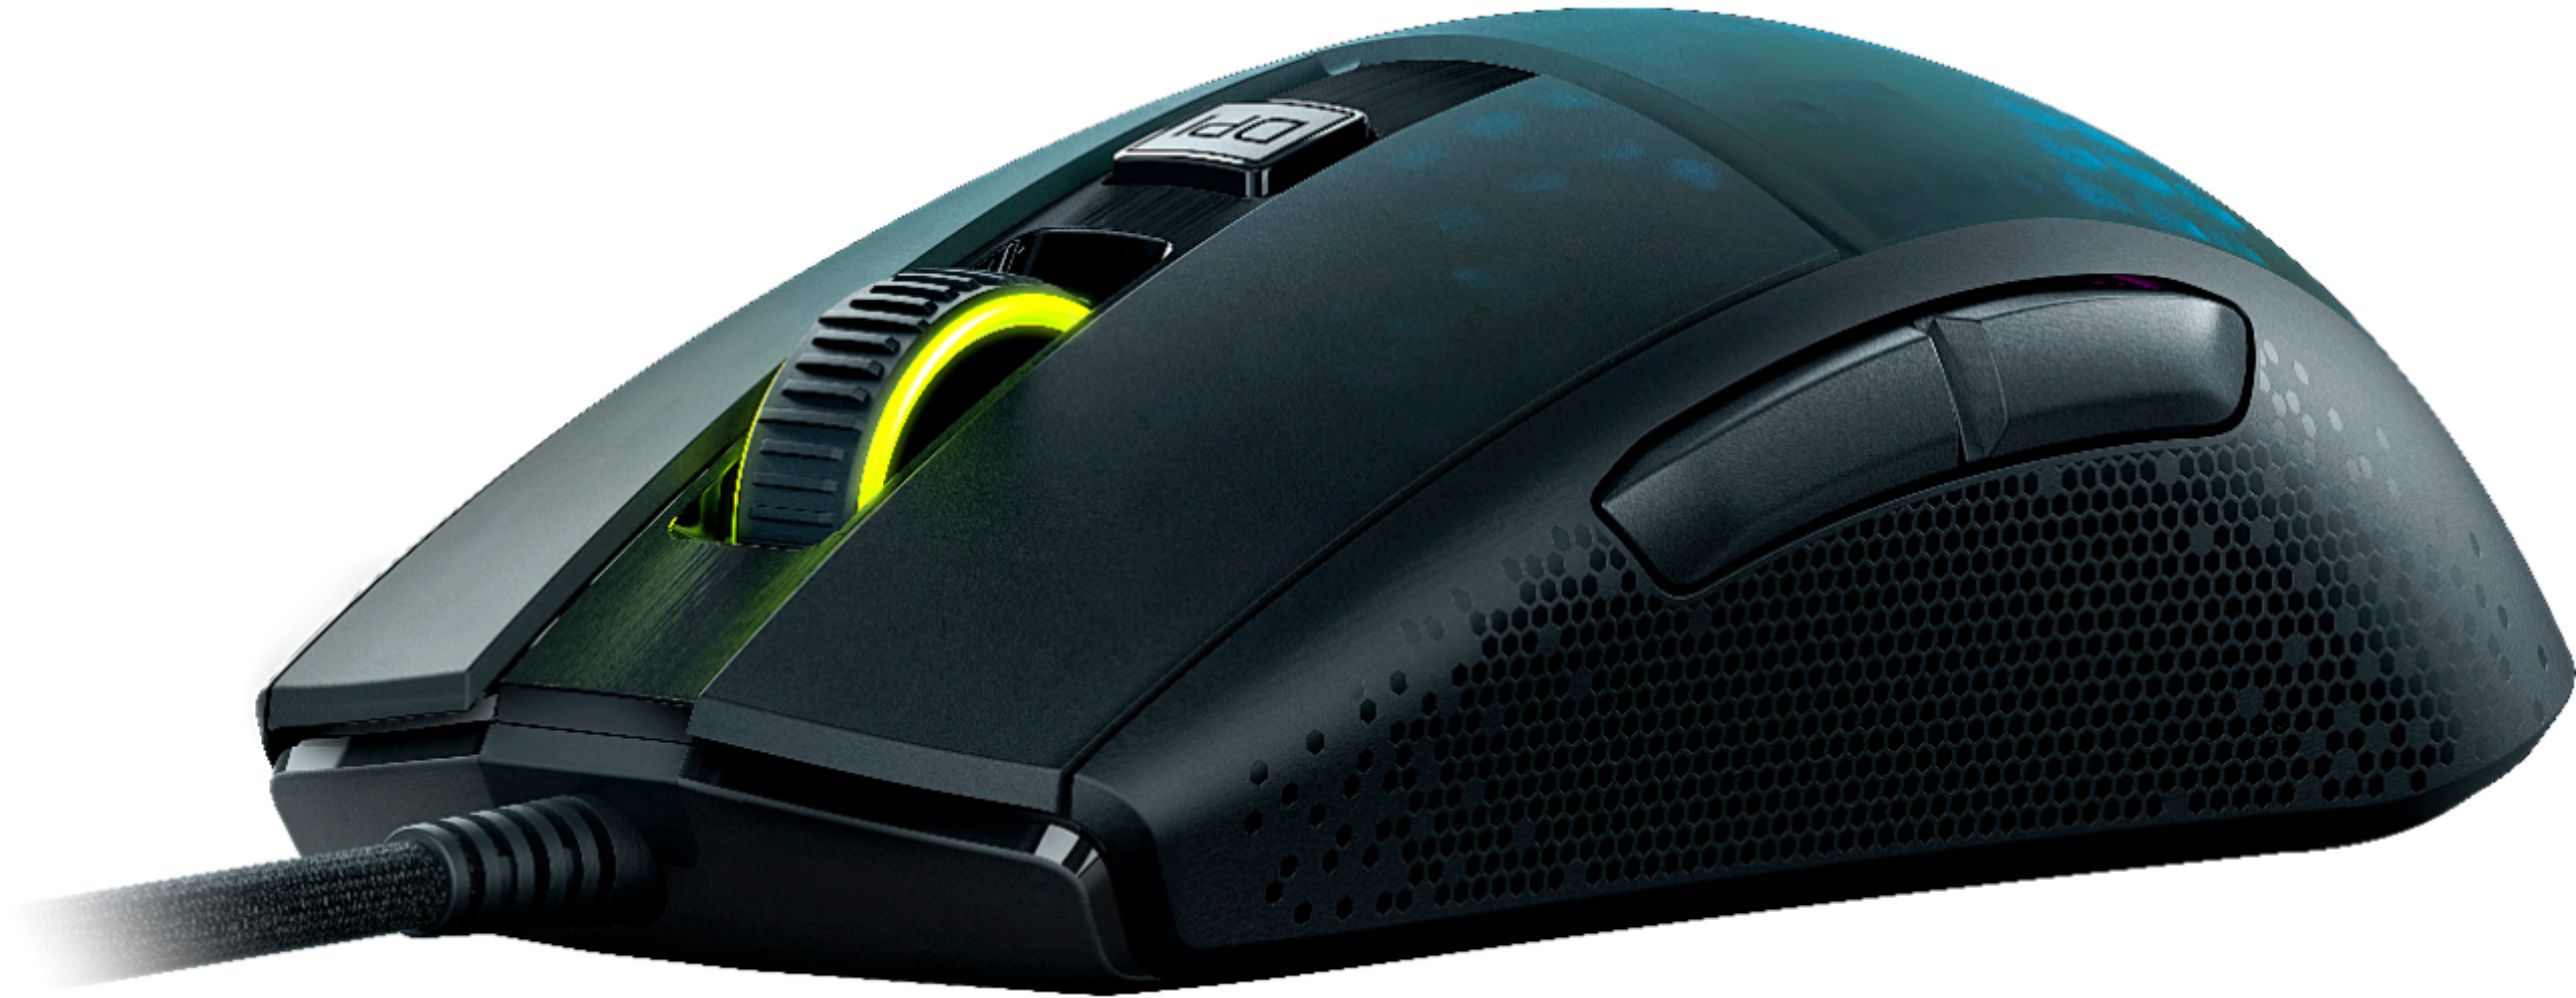 Roccat Launches its Burst Pro Air Wireless Gaming Mouse - eTeknix